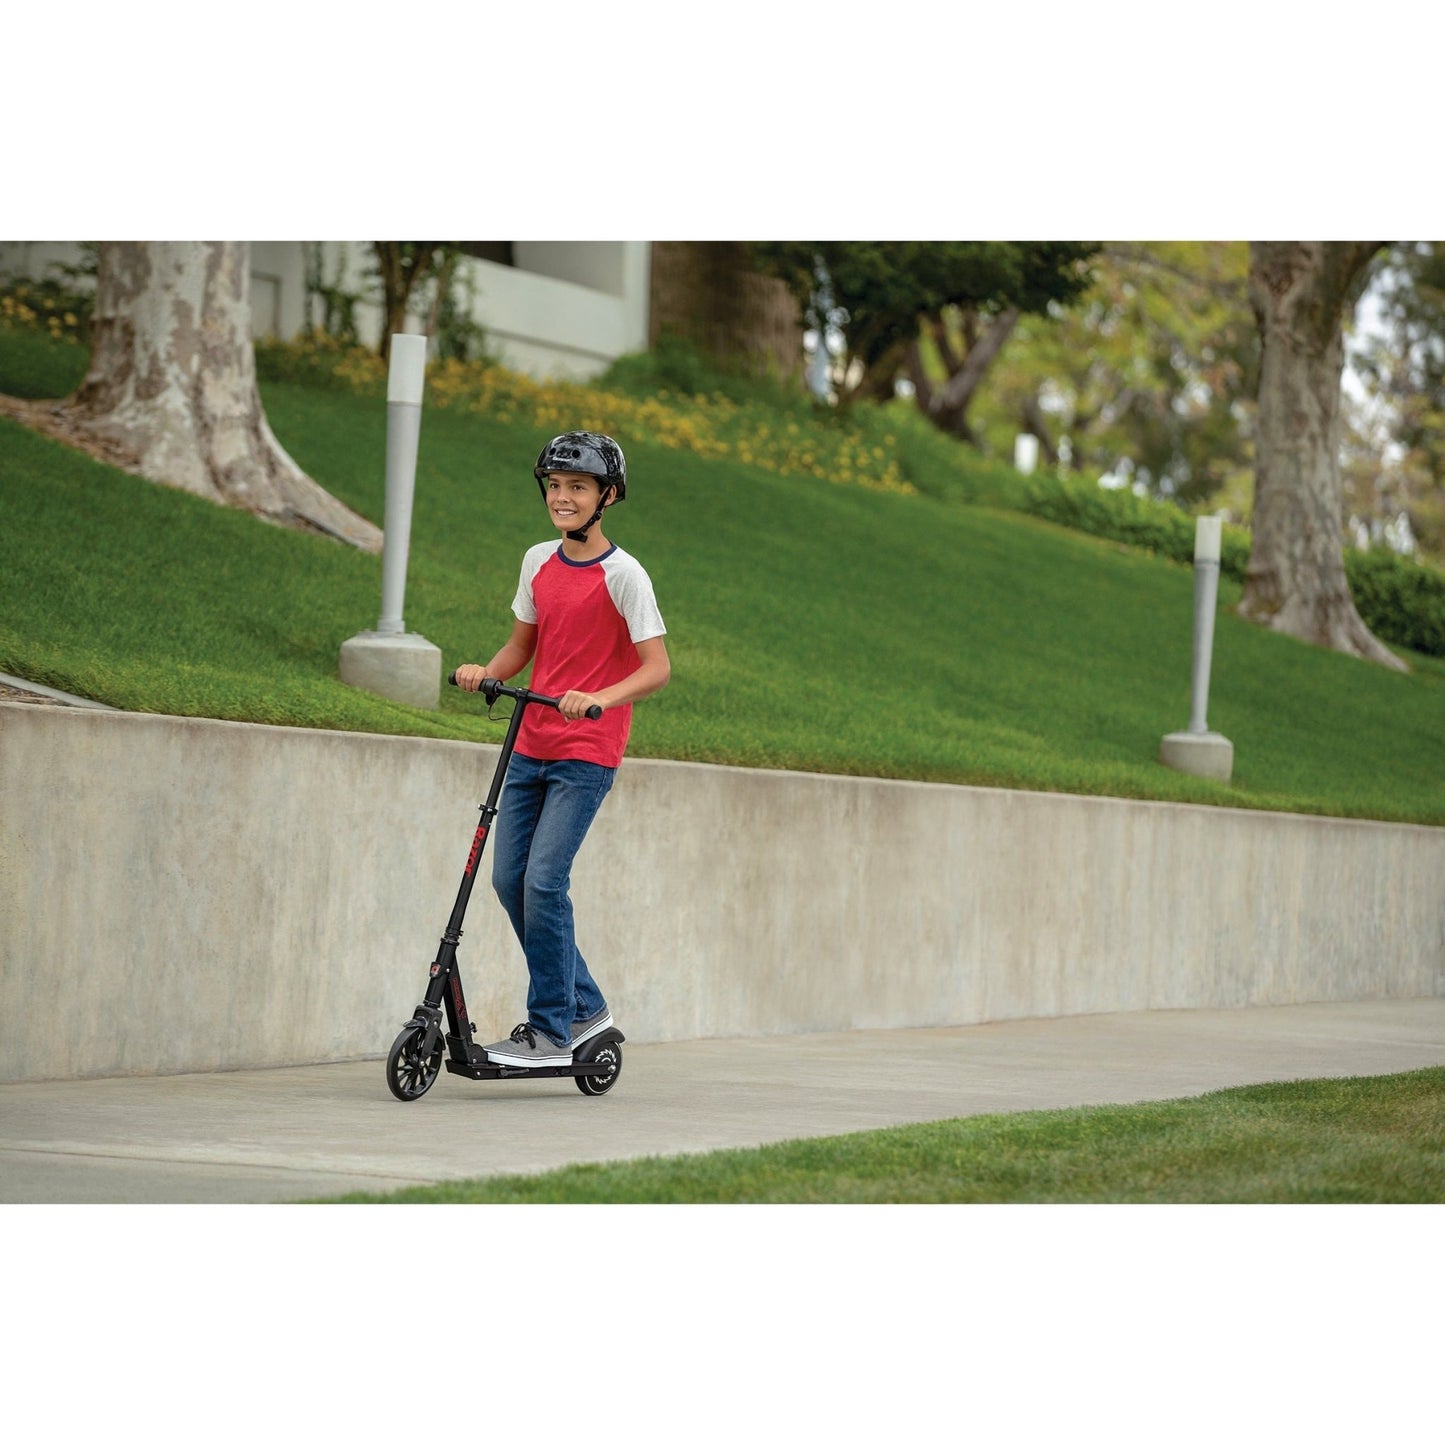 Power A5 Electric Scooter - Black 22 Volt Lithium